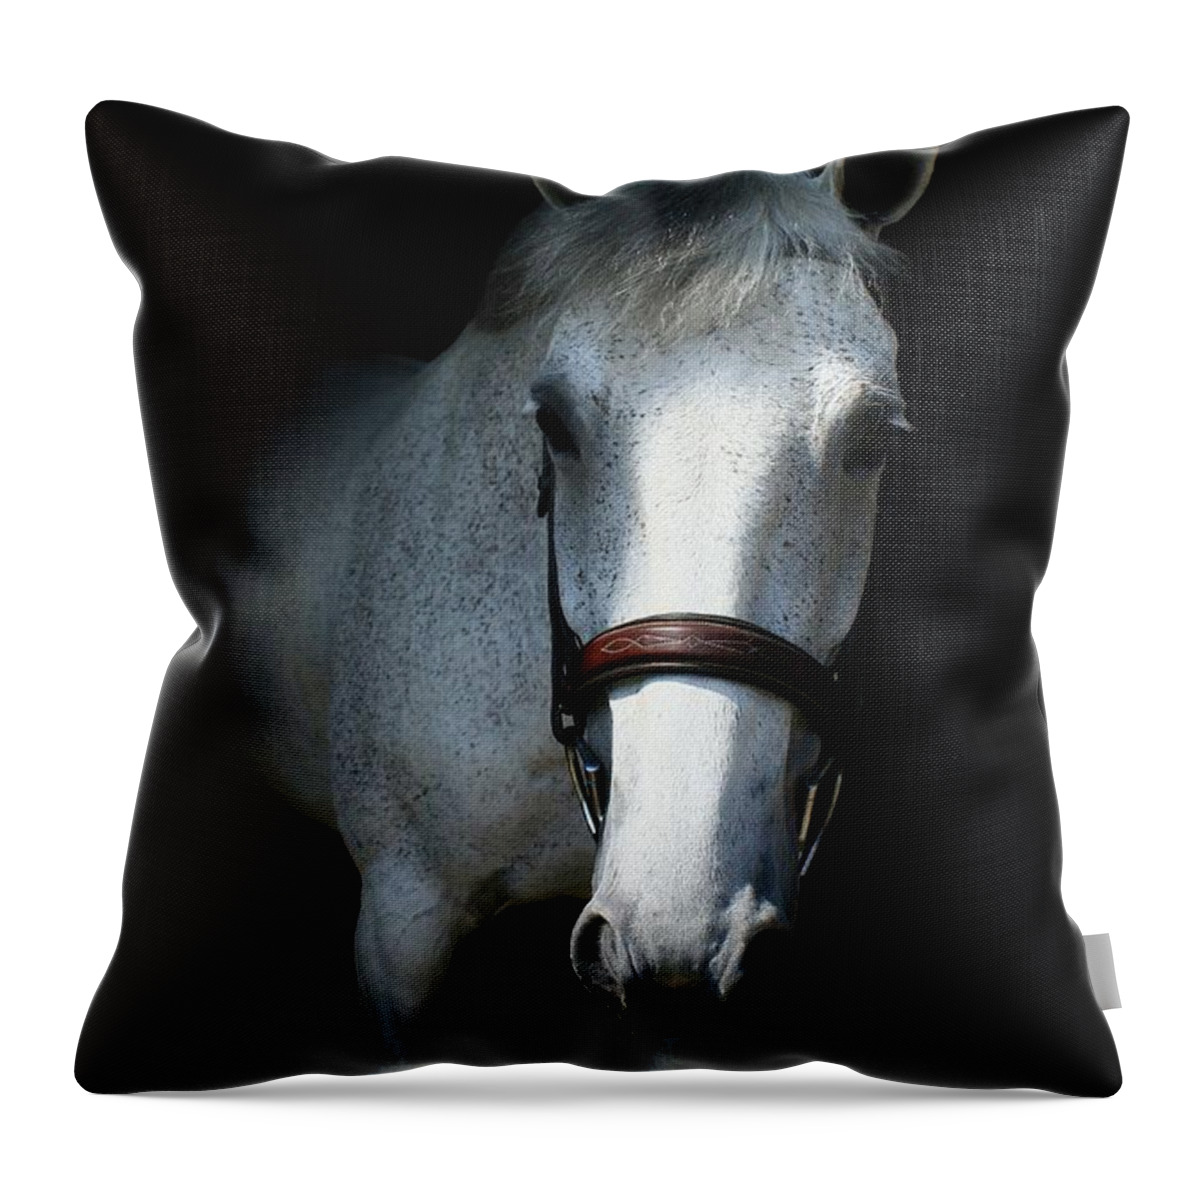  Throw Pillow featuring the photograph Vanessa-Ireland22 by Life With Horses